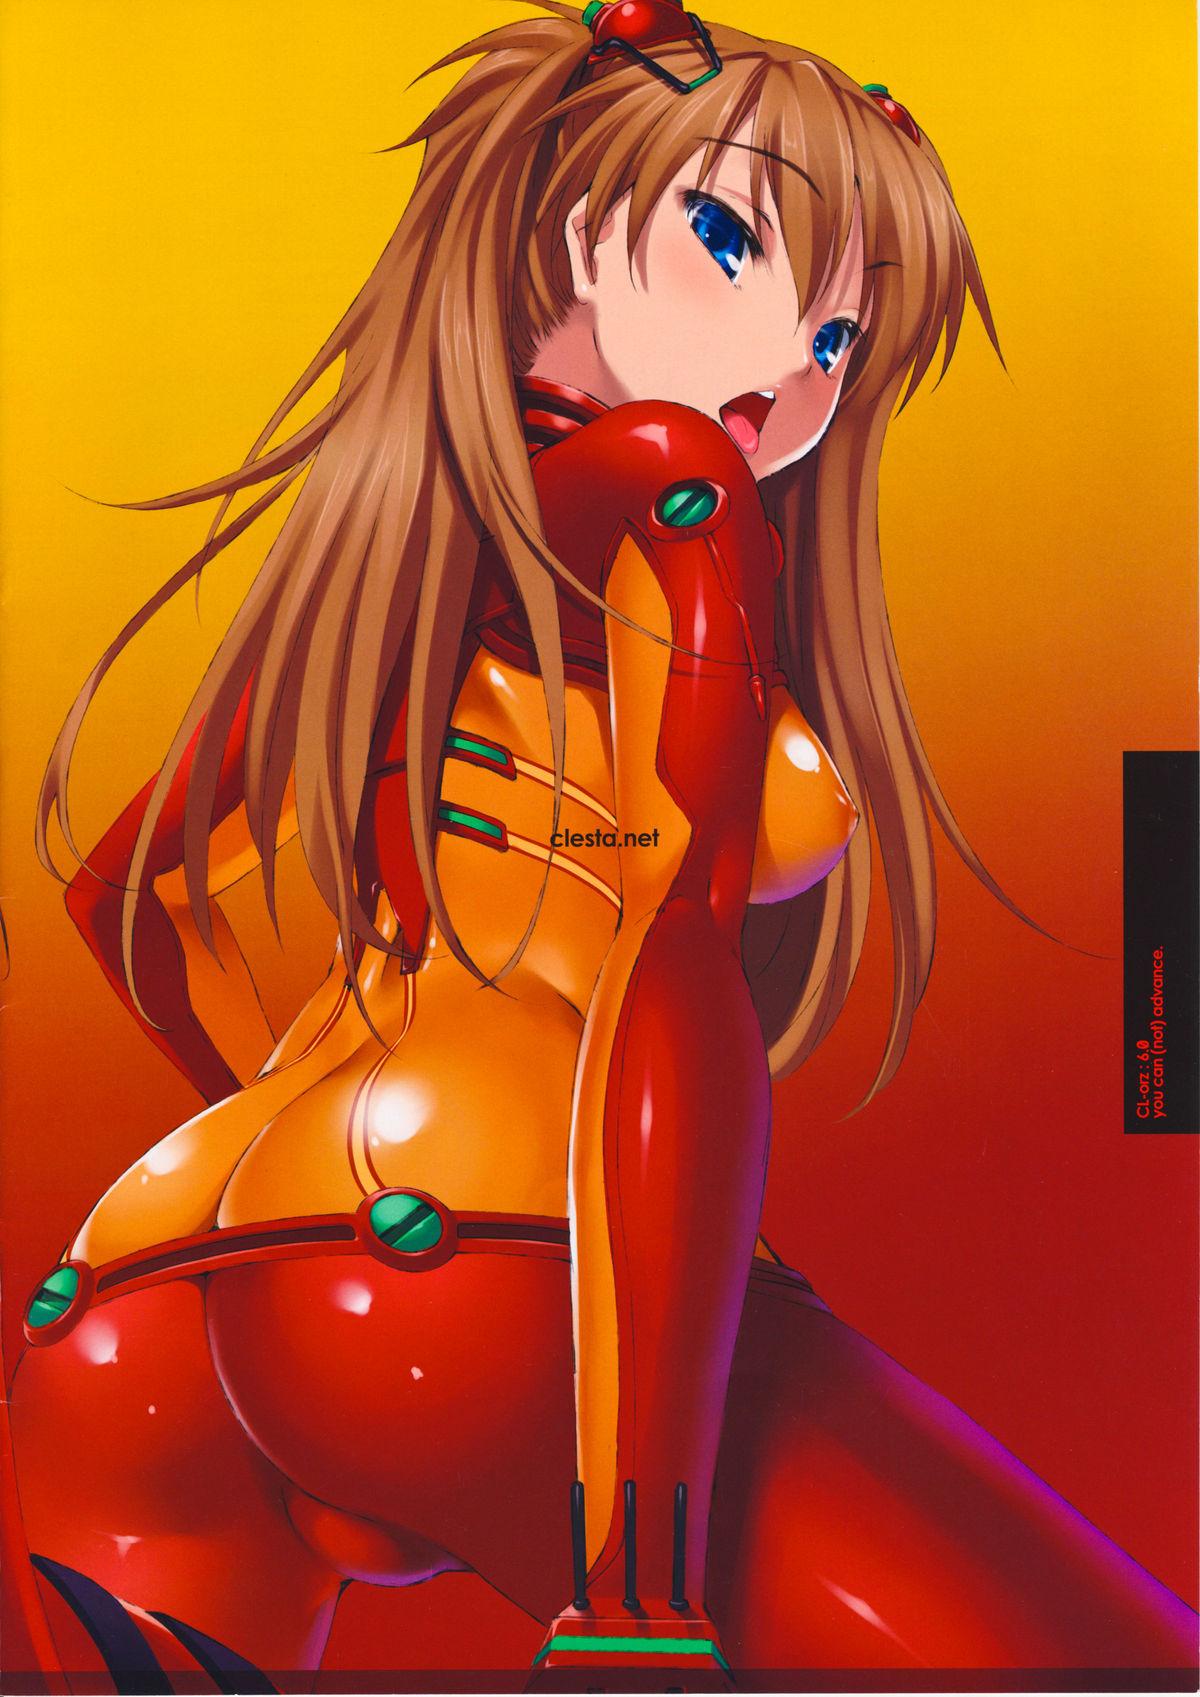 Webcams (C76) [Clesta (Cle Masahiro)] CL-orz 6.0 you can (not) advance. (Rebuild of Evangelion) [Decensored] - Neon genesis evangelion Gay Spank - Page 16